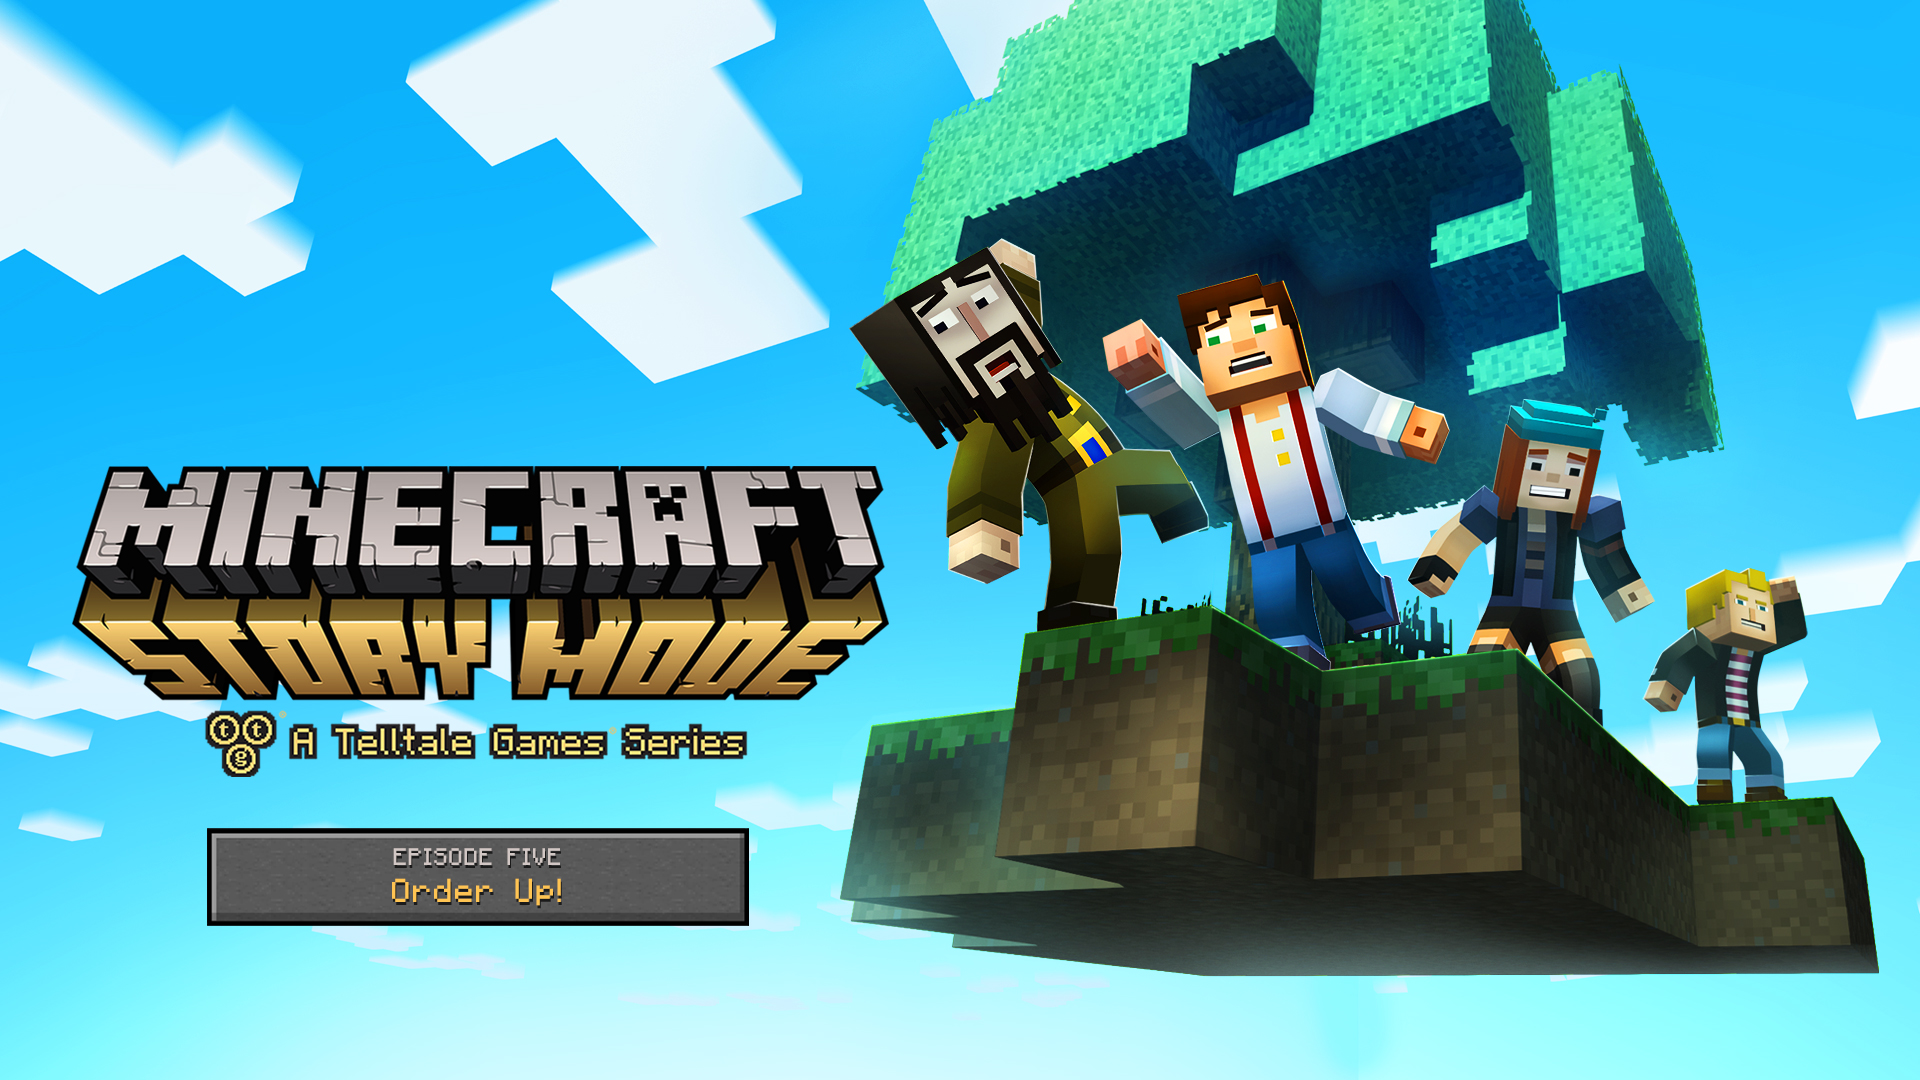 Minecraft: Story Mode From Telltale Games Available on Google Play for $4.99